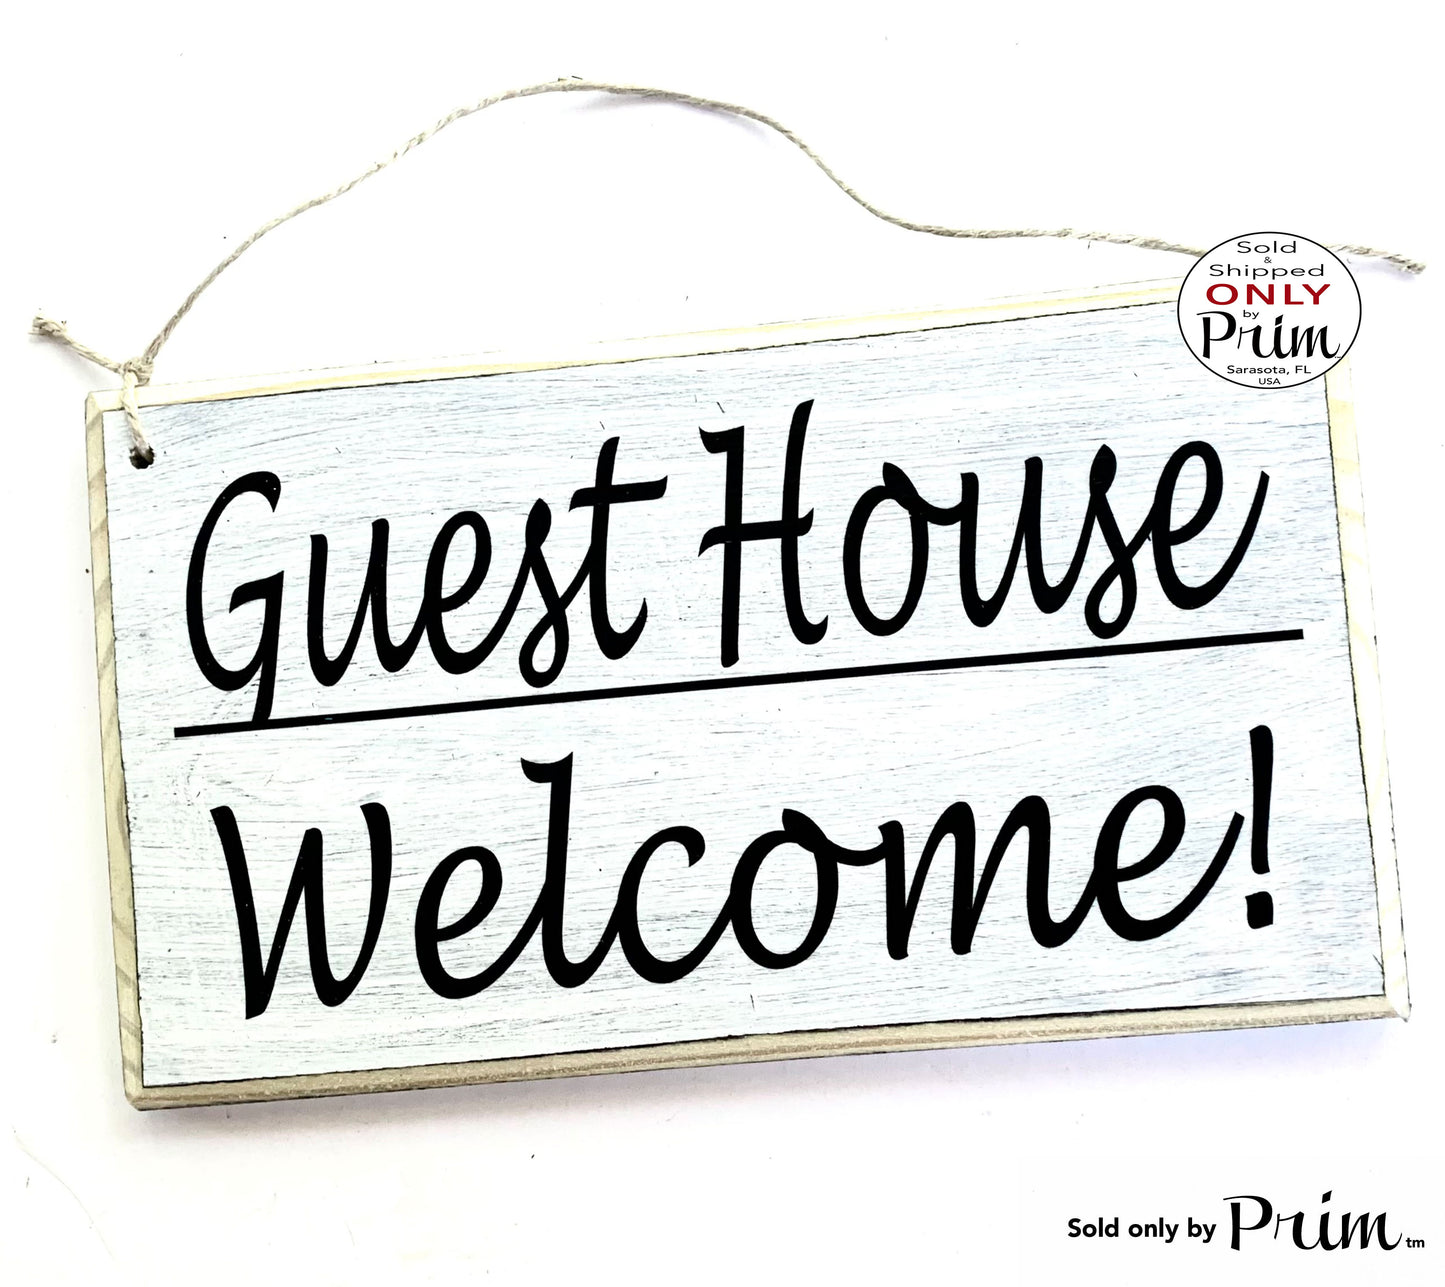 10x6 Guest House Welcome Custom Wood Sign Suite Quarters Cottage Bed and Breakfast AirBnb Guest Entrance Wall Decor Door Hanging Plaque Designs by Prim